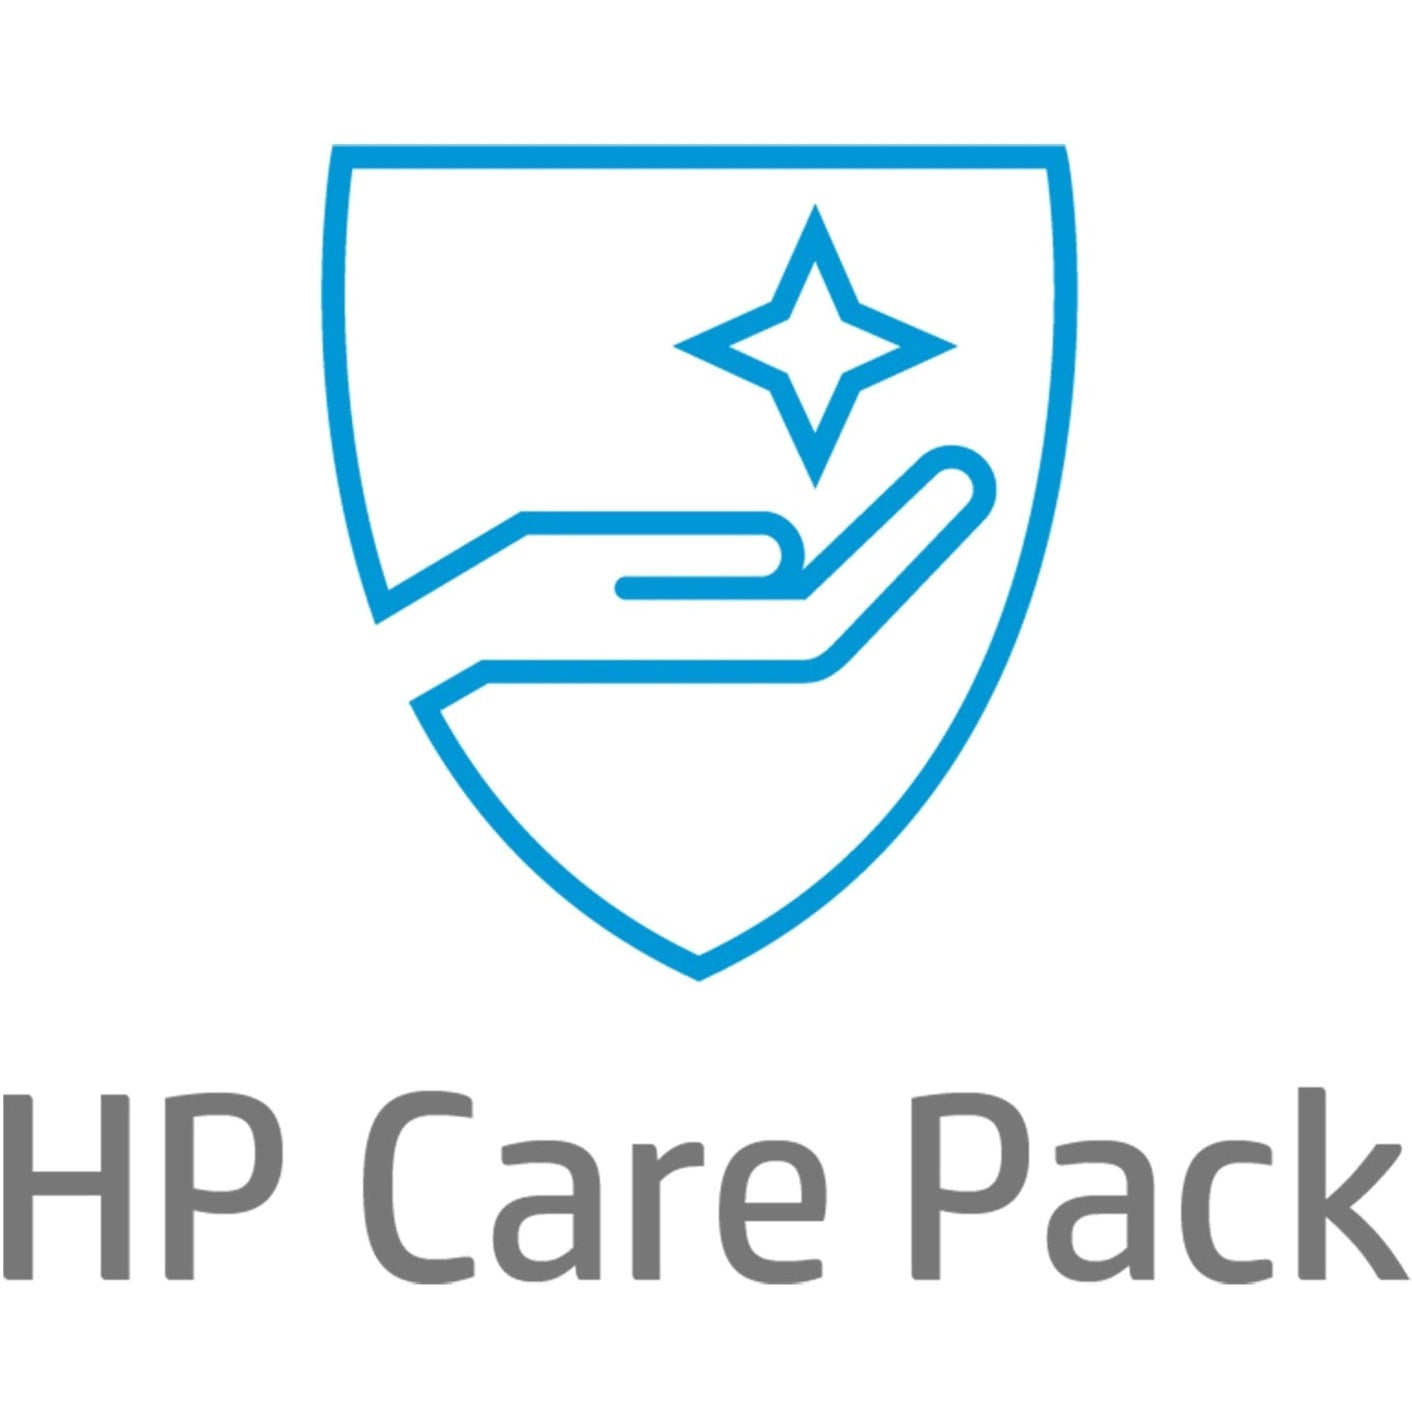 HP Care Pack - 5 Year - Warranty (UE337E)